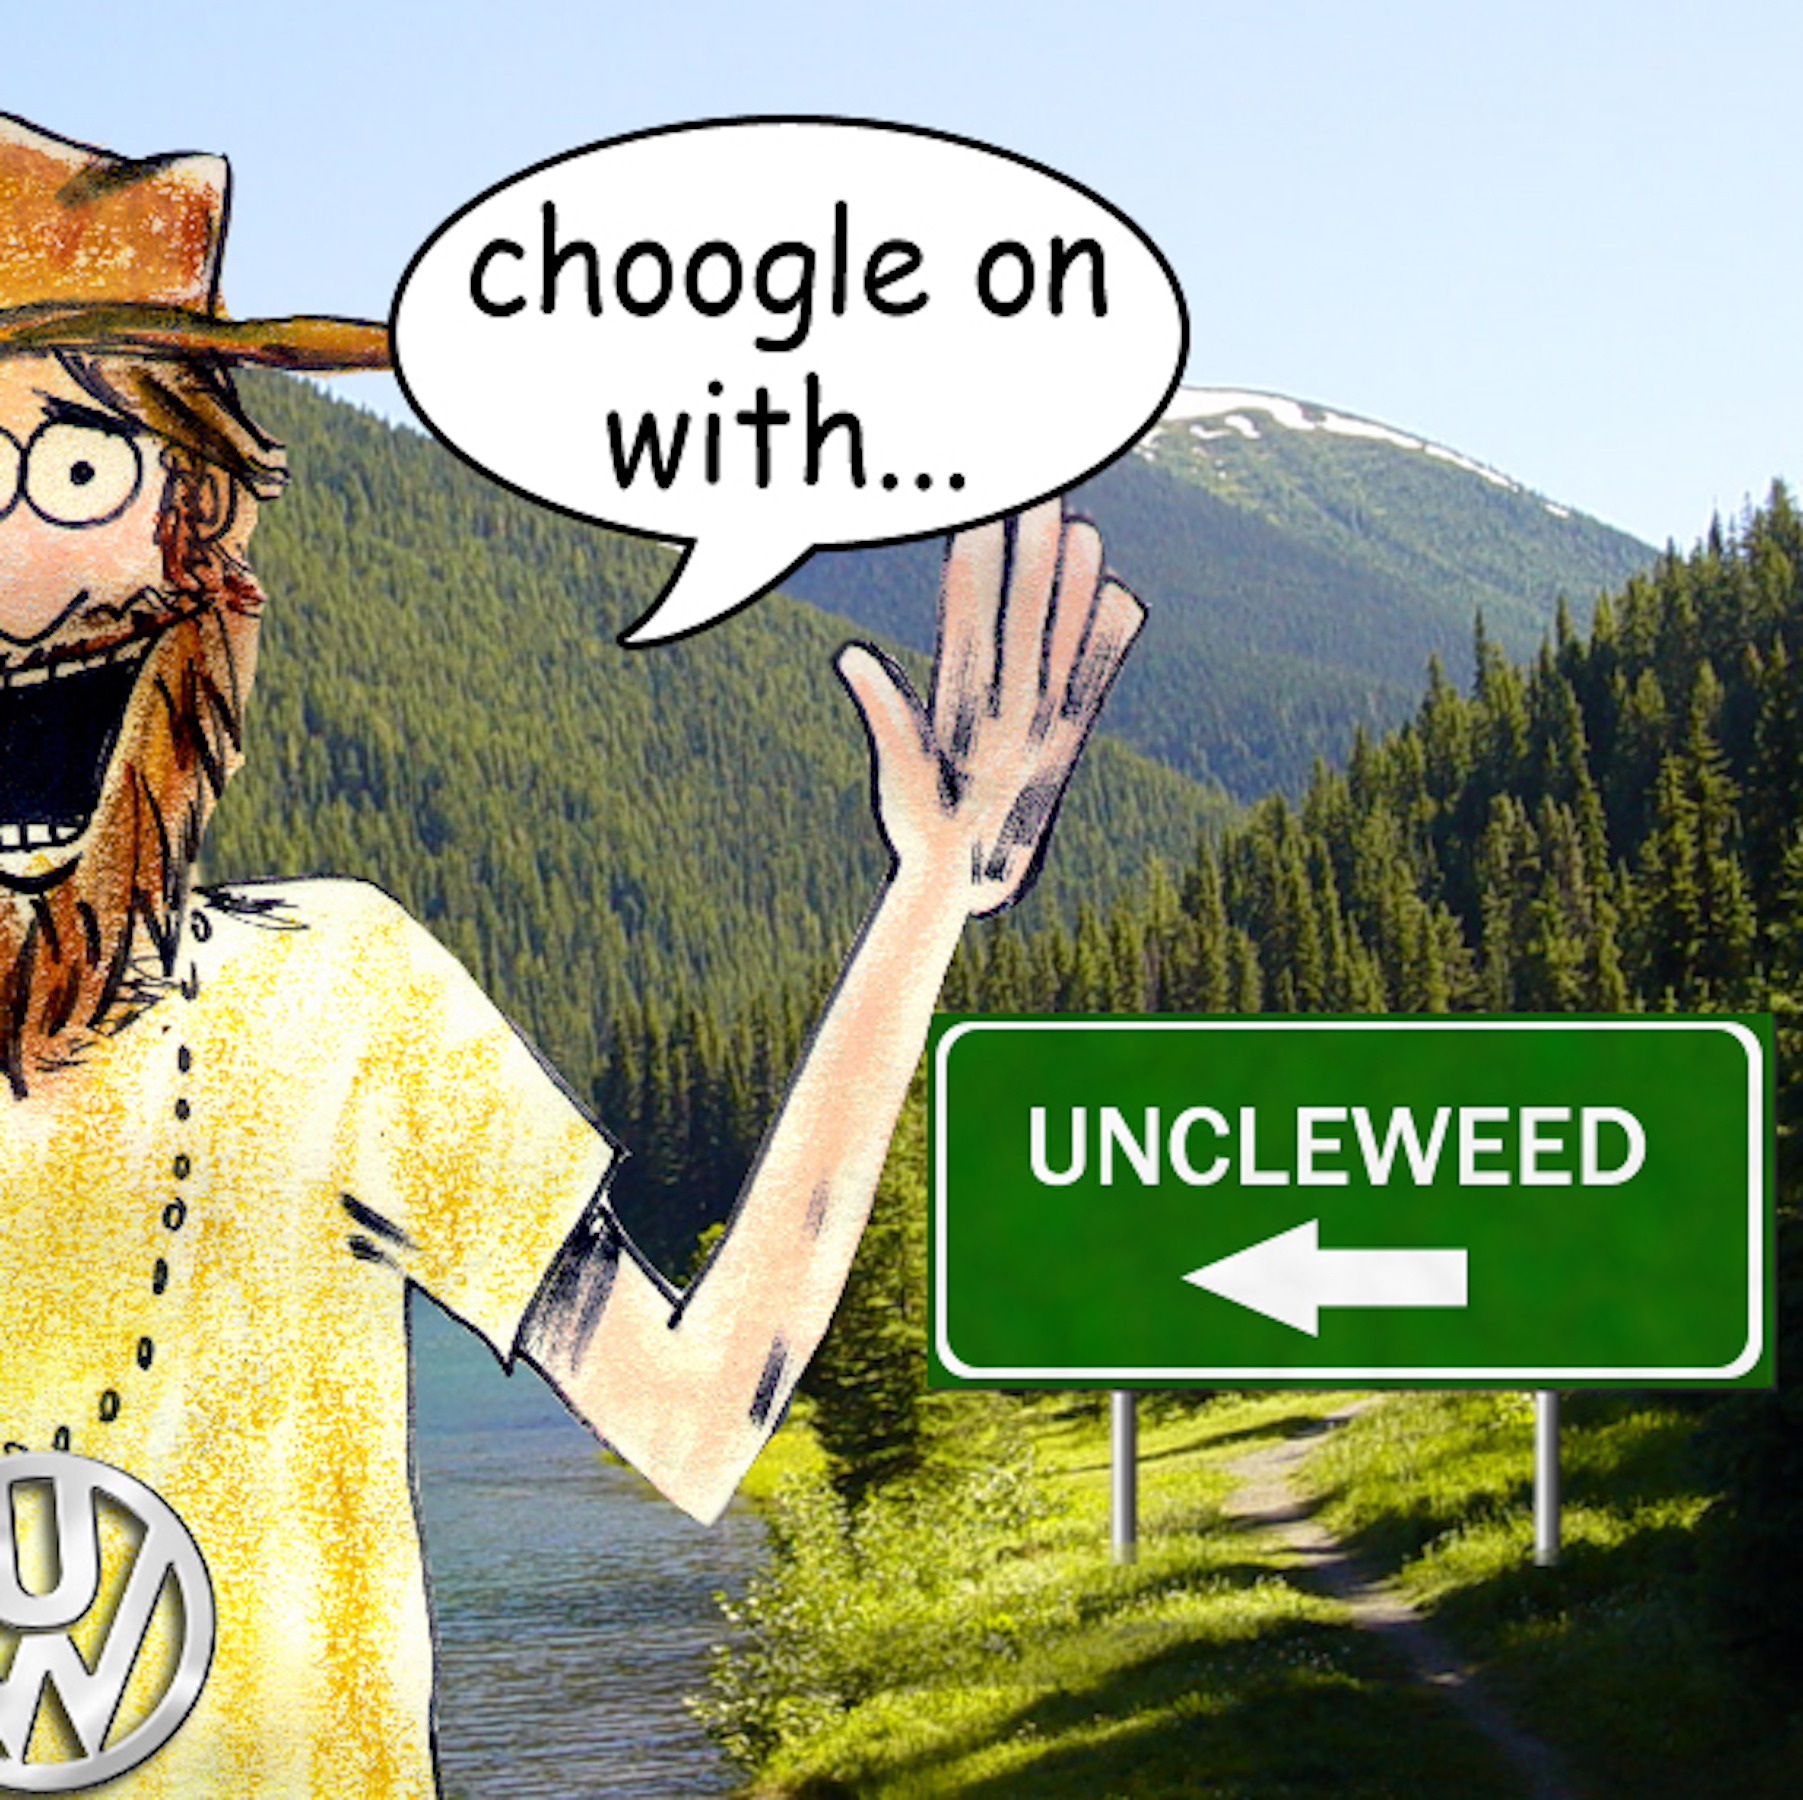 Choogle On with Uncle Weed